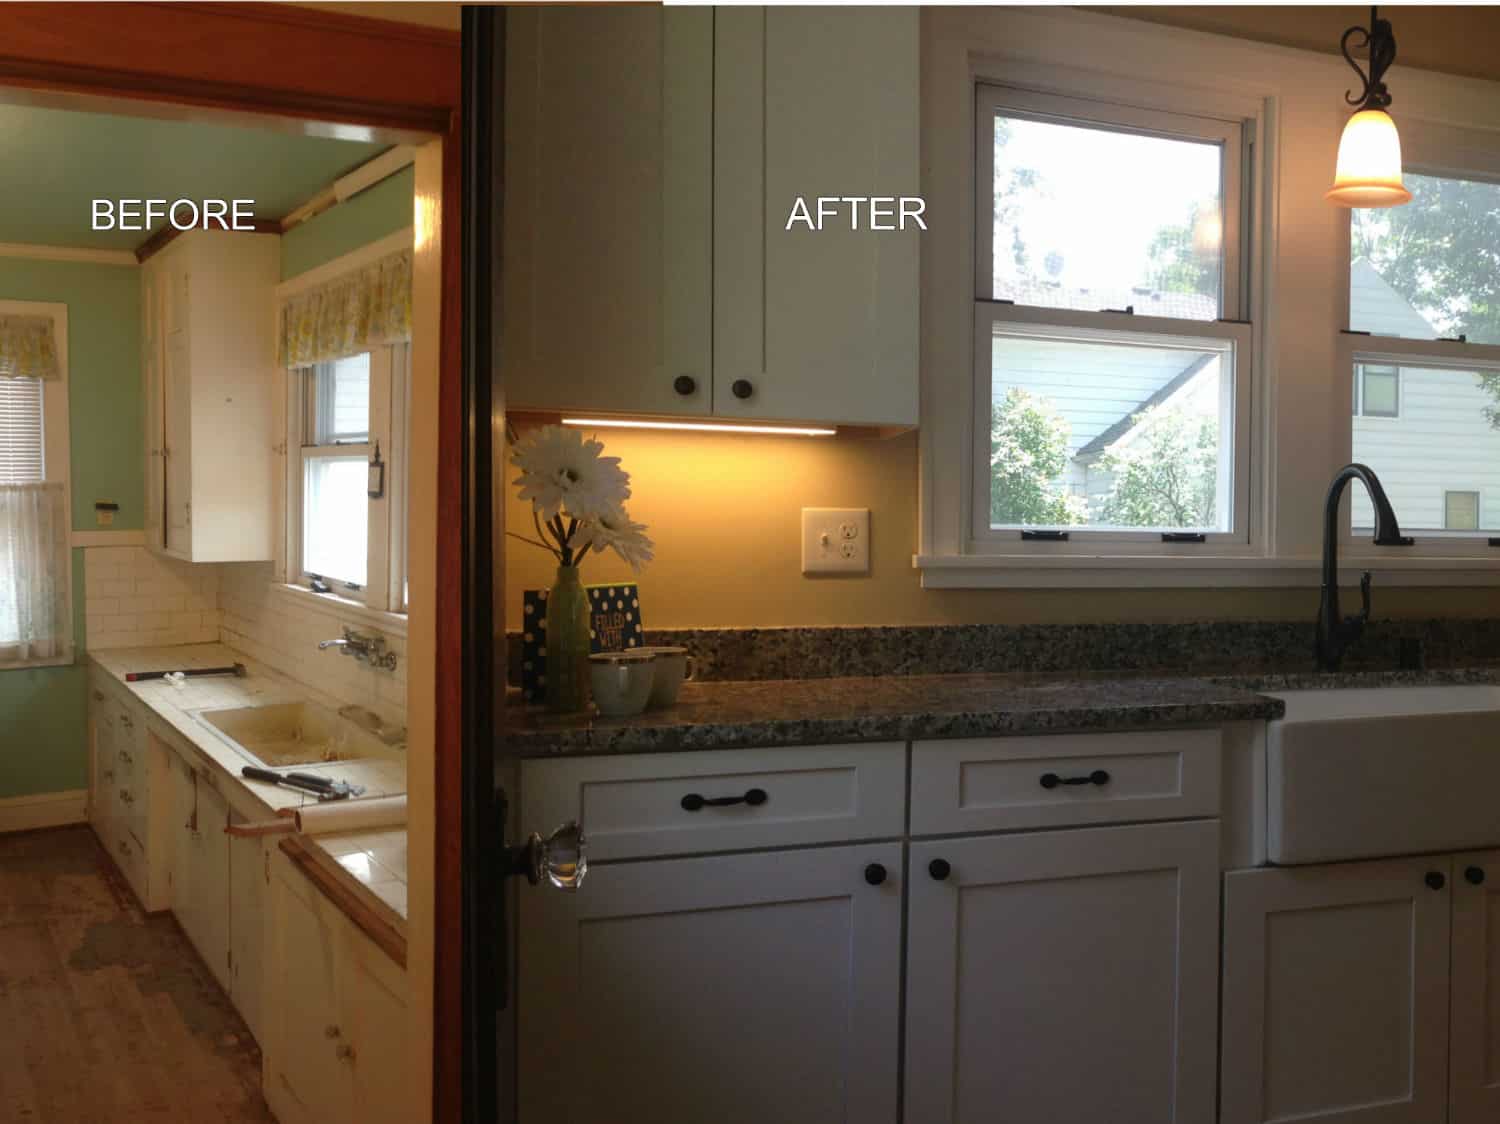 Before and after kitchen remodel